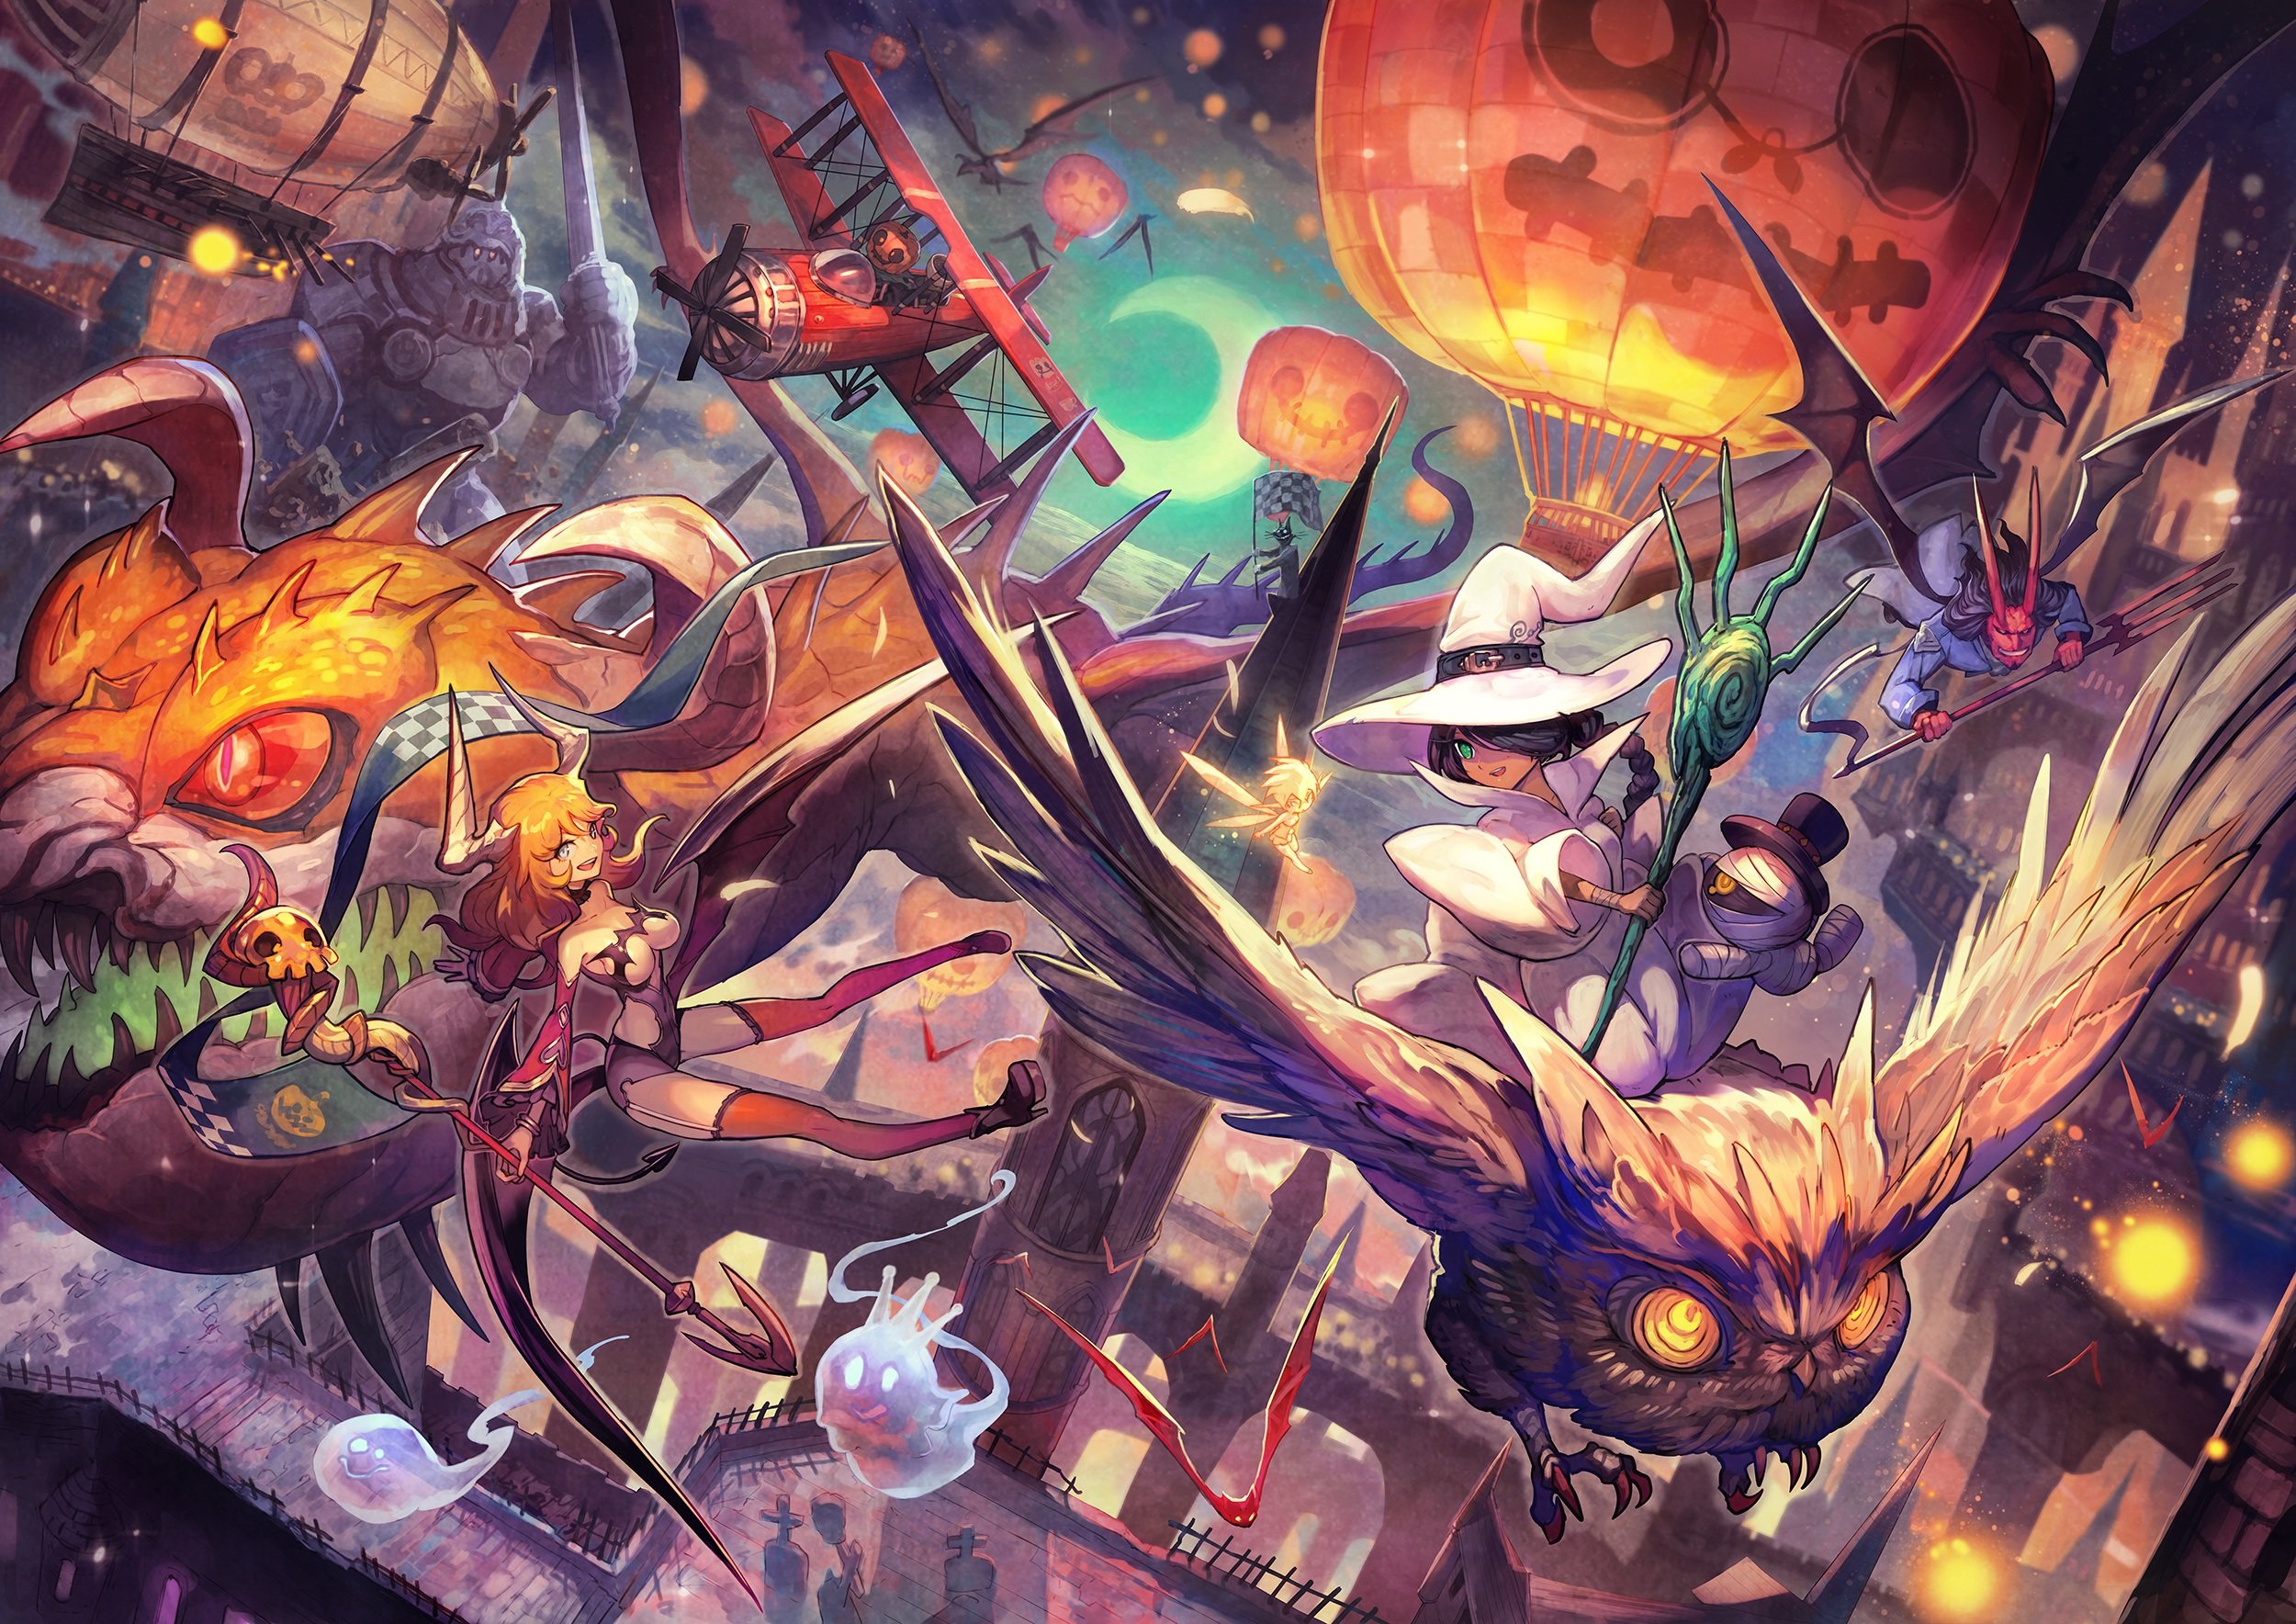 aircraft, Animal, Bandage, Bat, Bird, City, Demon, Group, Halloween, Hat, Horns, Lack, Moon, Original, Owl, Sky, Spear, Staff, Thighhighs, Weapon, Wings, Witch, Hat Wallpaper